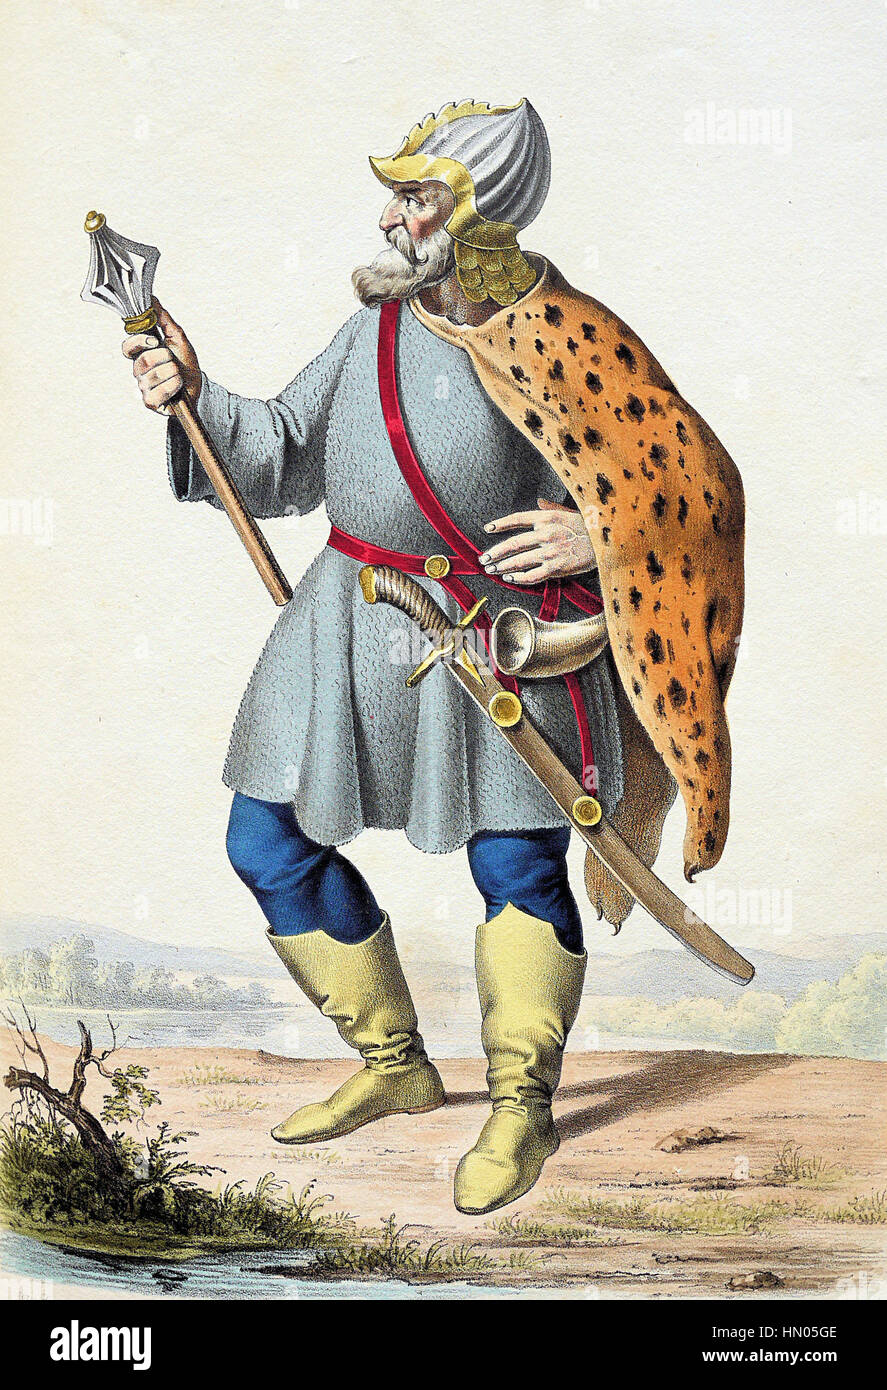 ÁRPÁD (c 895-c 907) Grand Prince of Hungary in an 1828 lithograph published in Austria Stock Photo